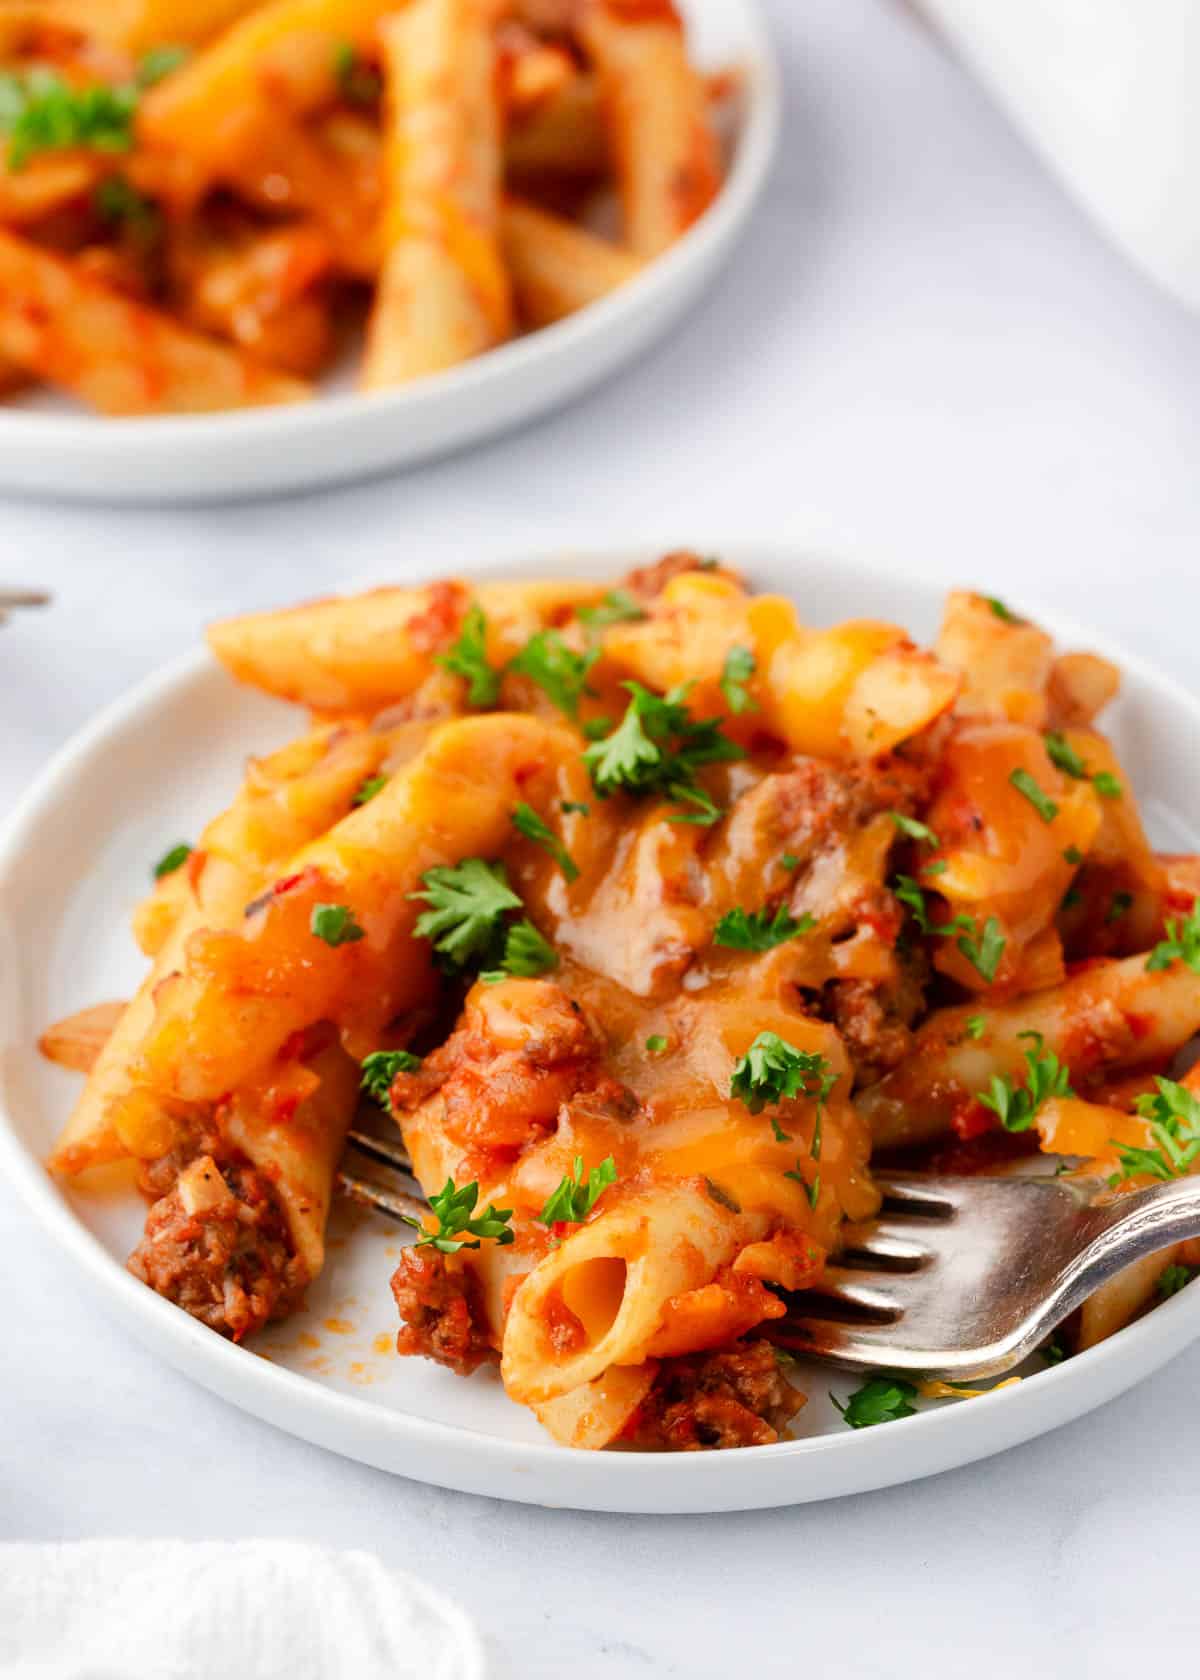 Ground beef casserole on a white plate.